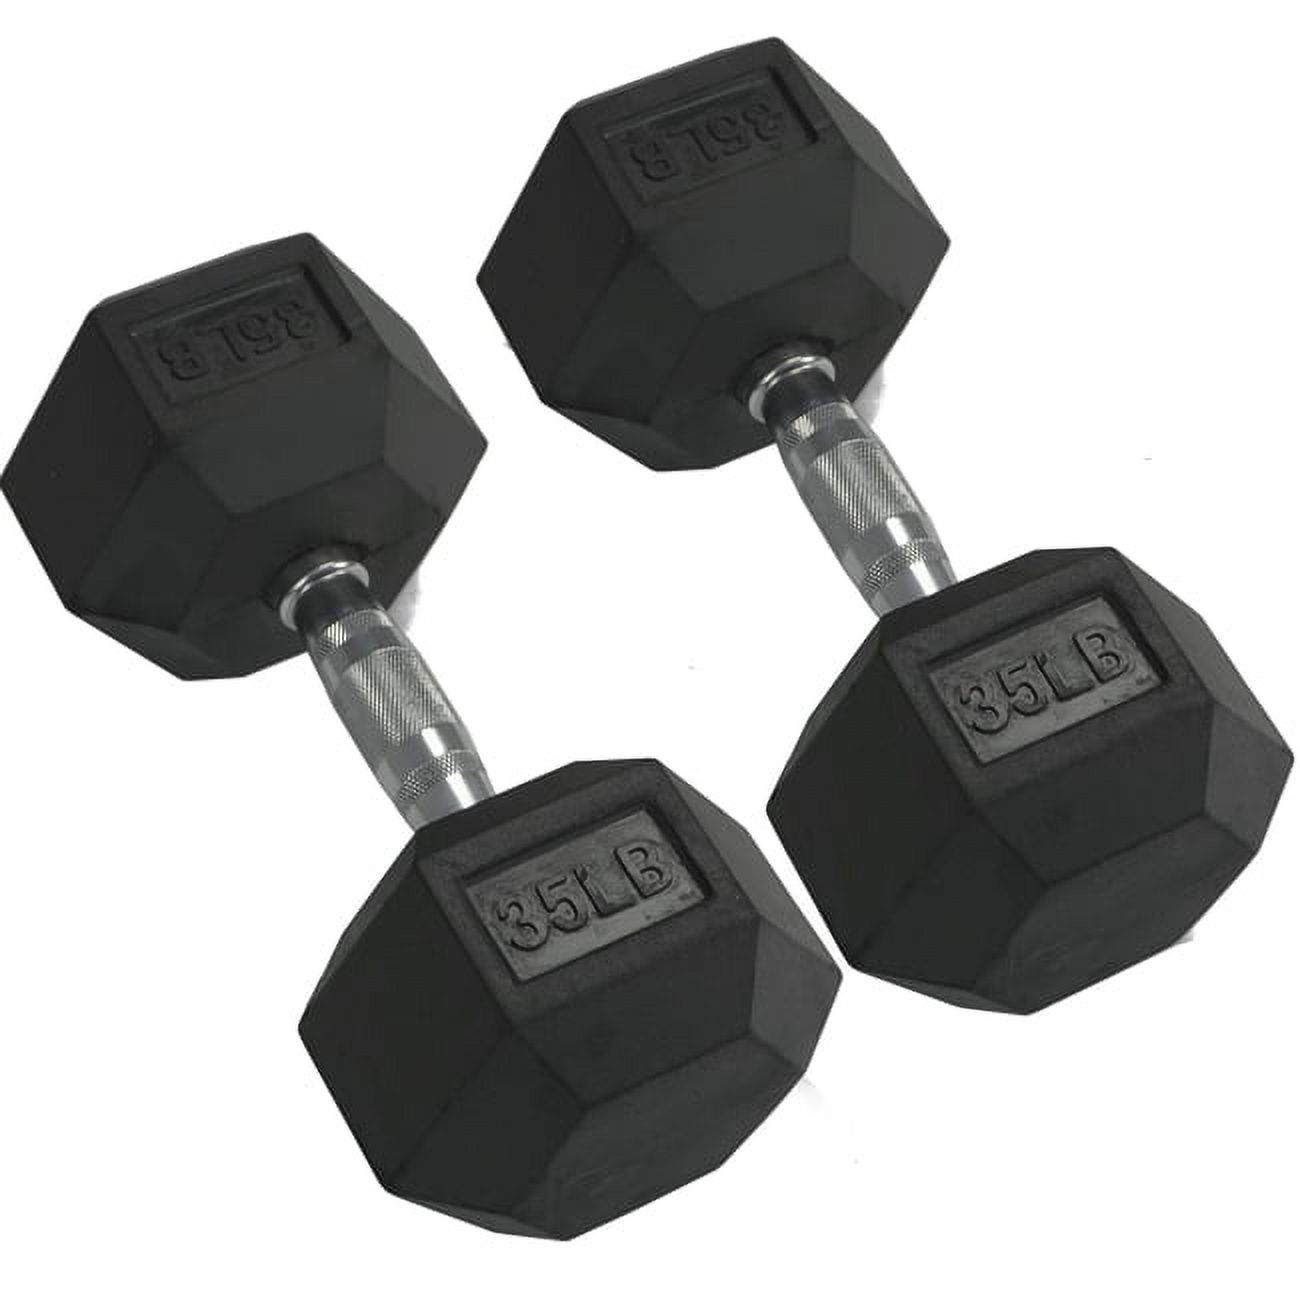 Titan Fitness 35 LB Pair Free Weights, Black Rubber Coated Hex Dumbbell, Ergonomic Cast Iron Handle, Strength Training - image 3 of 4